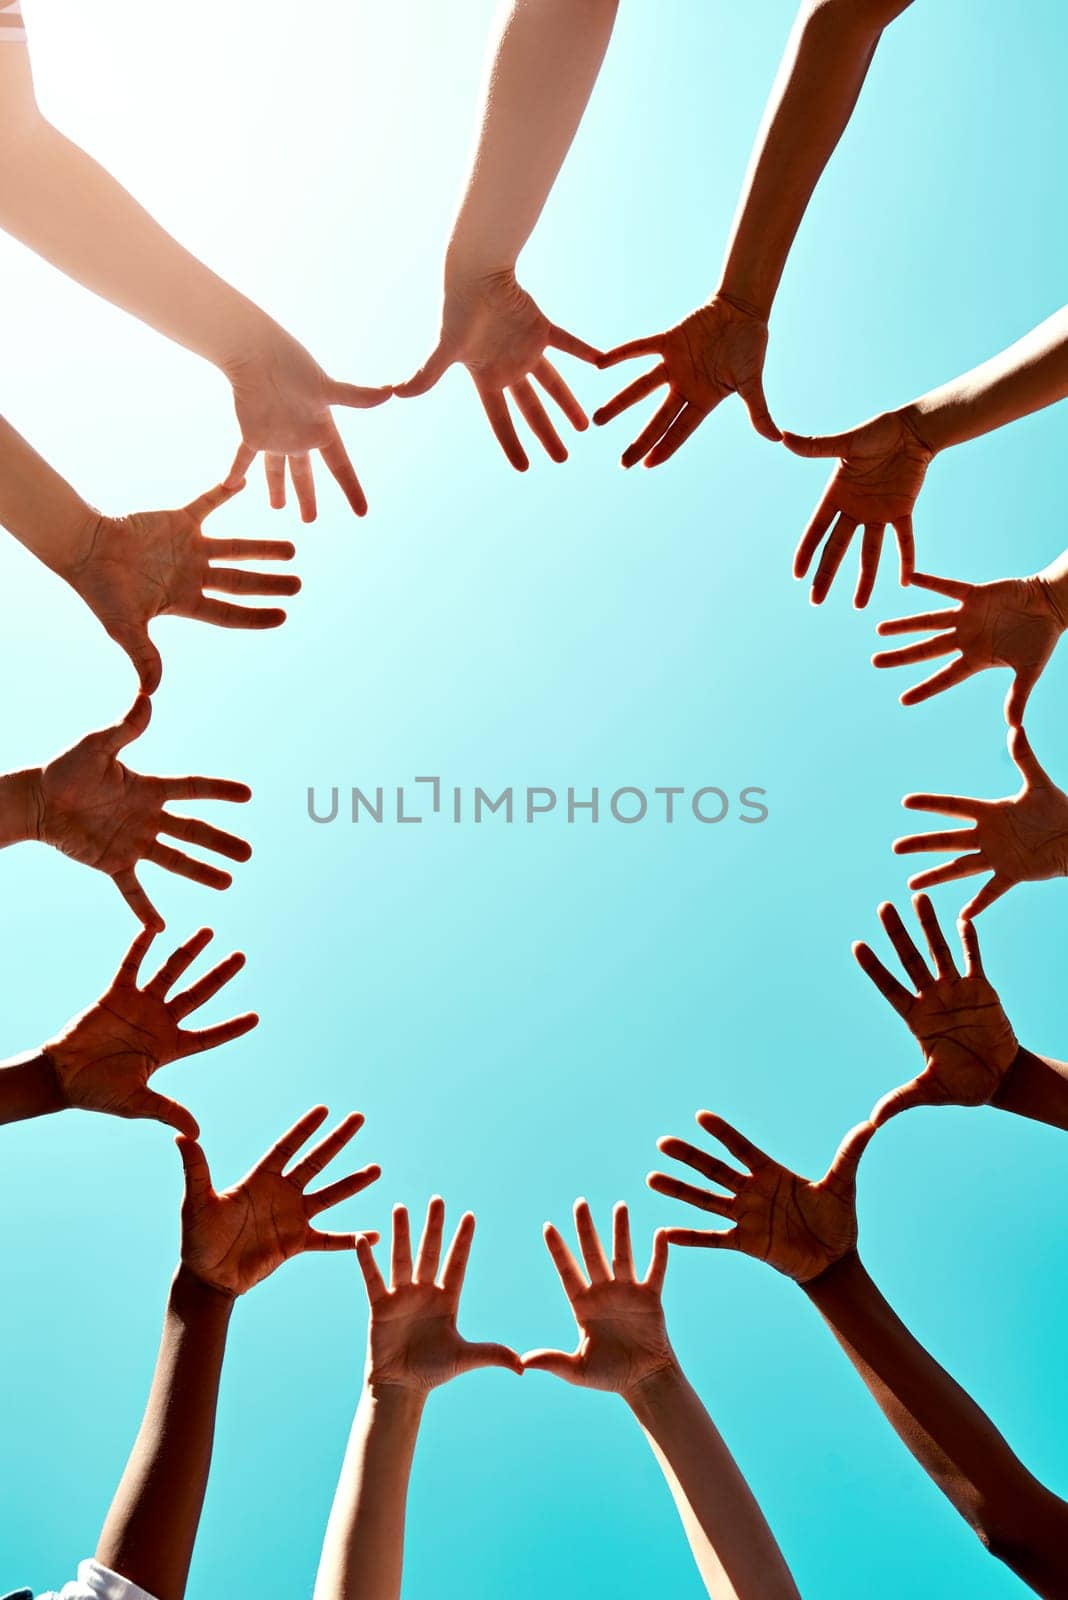 Community, support with hands in air and in blue sky outdoors for unity. Diversity or collaboration, sunlight and group of people with their hand in a circle for solidarity or trust with lens flare.